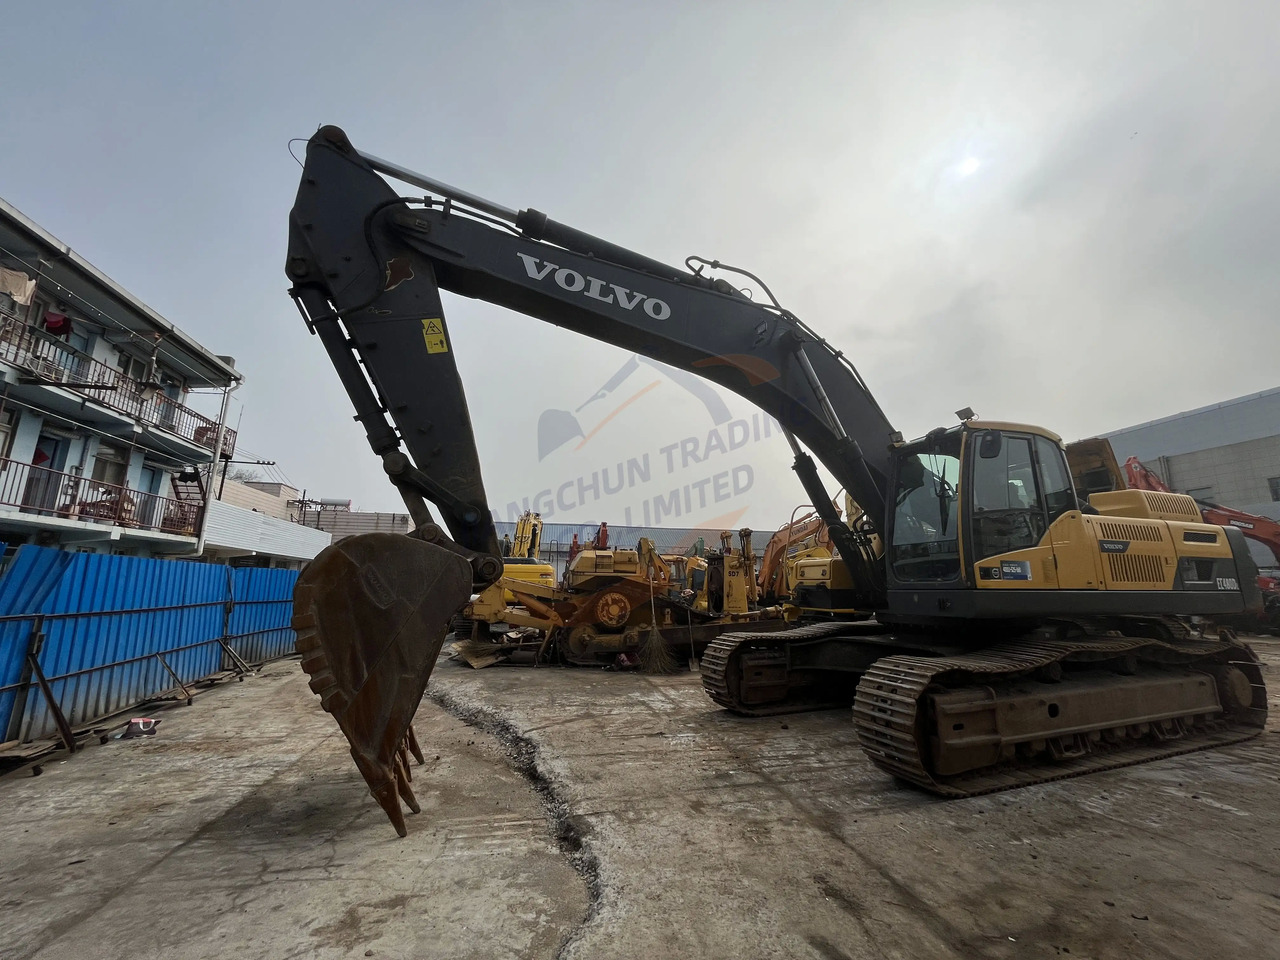 Ekskavator perayap New arrival second hand  hot selling Excavator construction machinery parts used excavator used  Volvo EC480D  in stock for sale: gambar 5